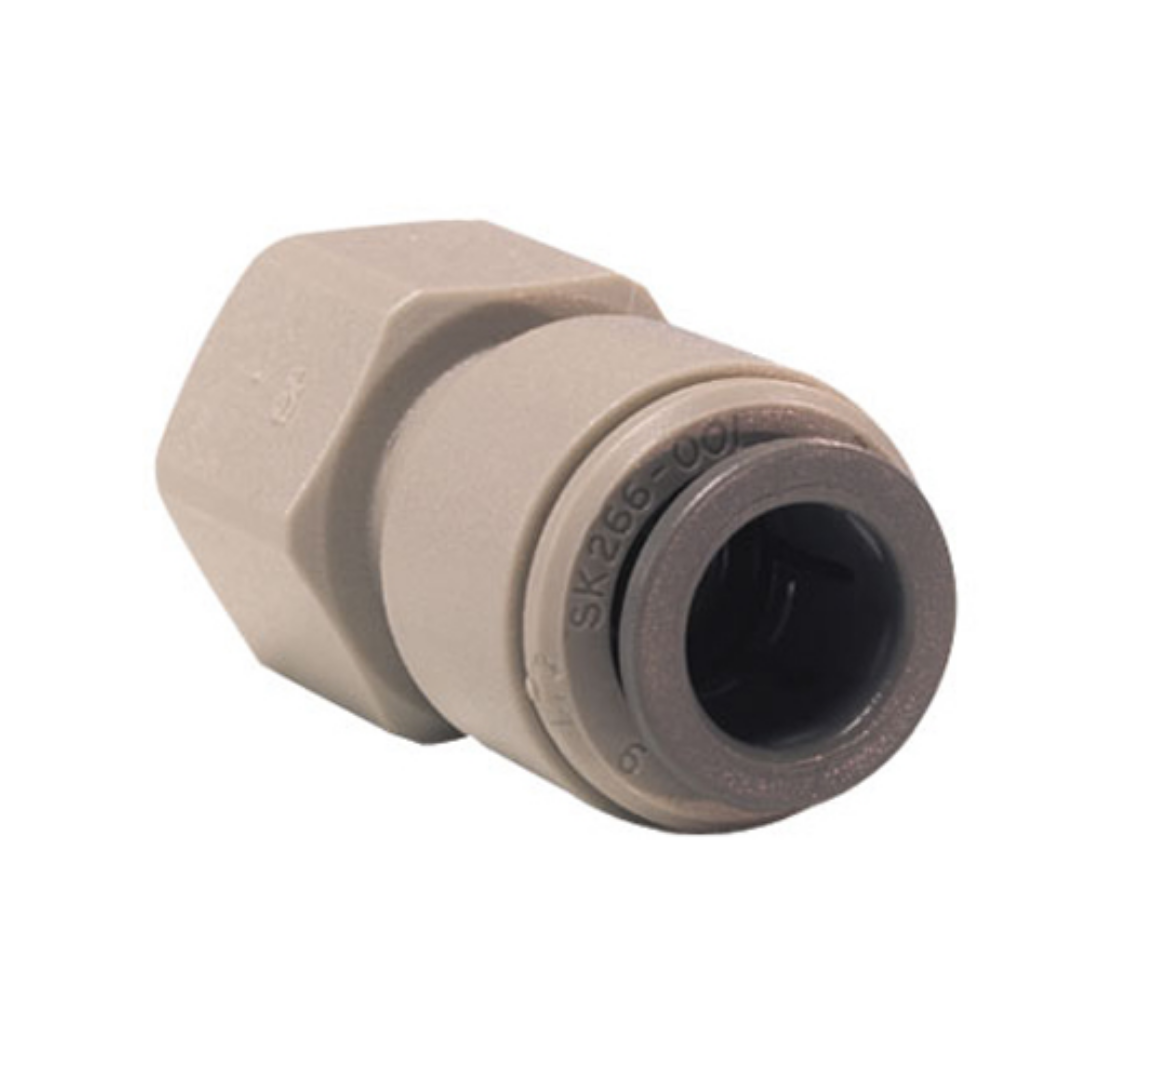 Picture of JG Push fit 1/2" BSP Female x 12mm Adapter (800-02002)